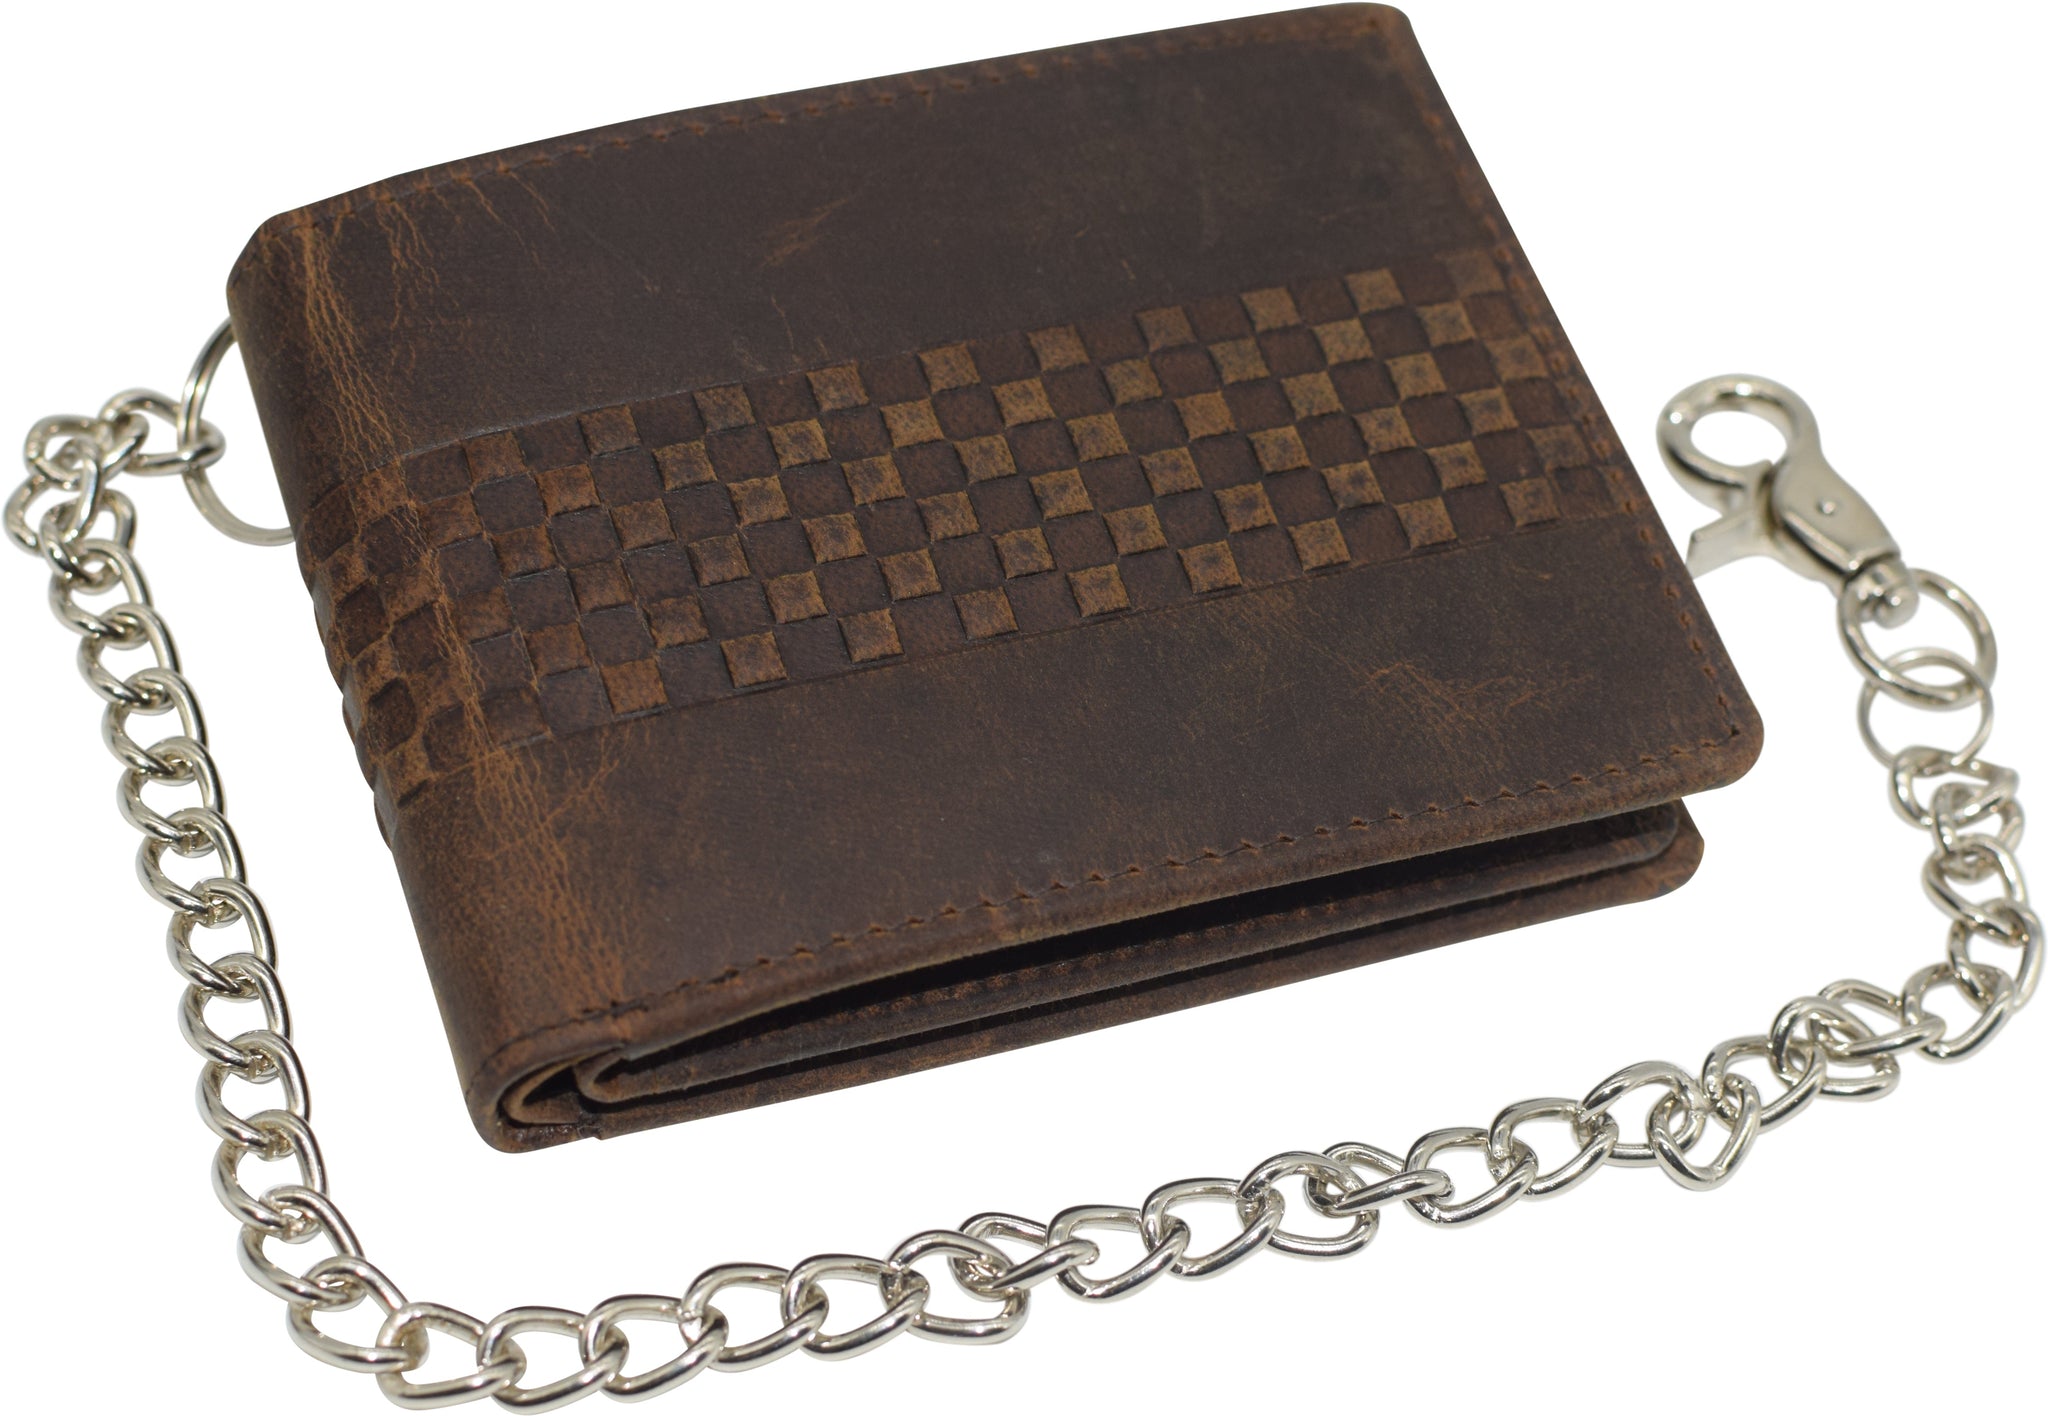 lv chain wallet mens